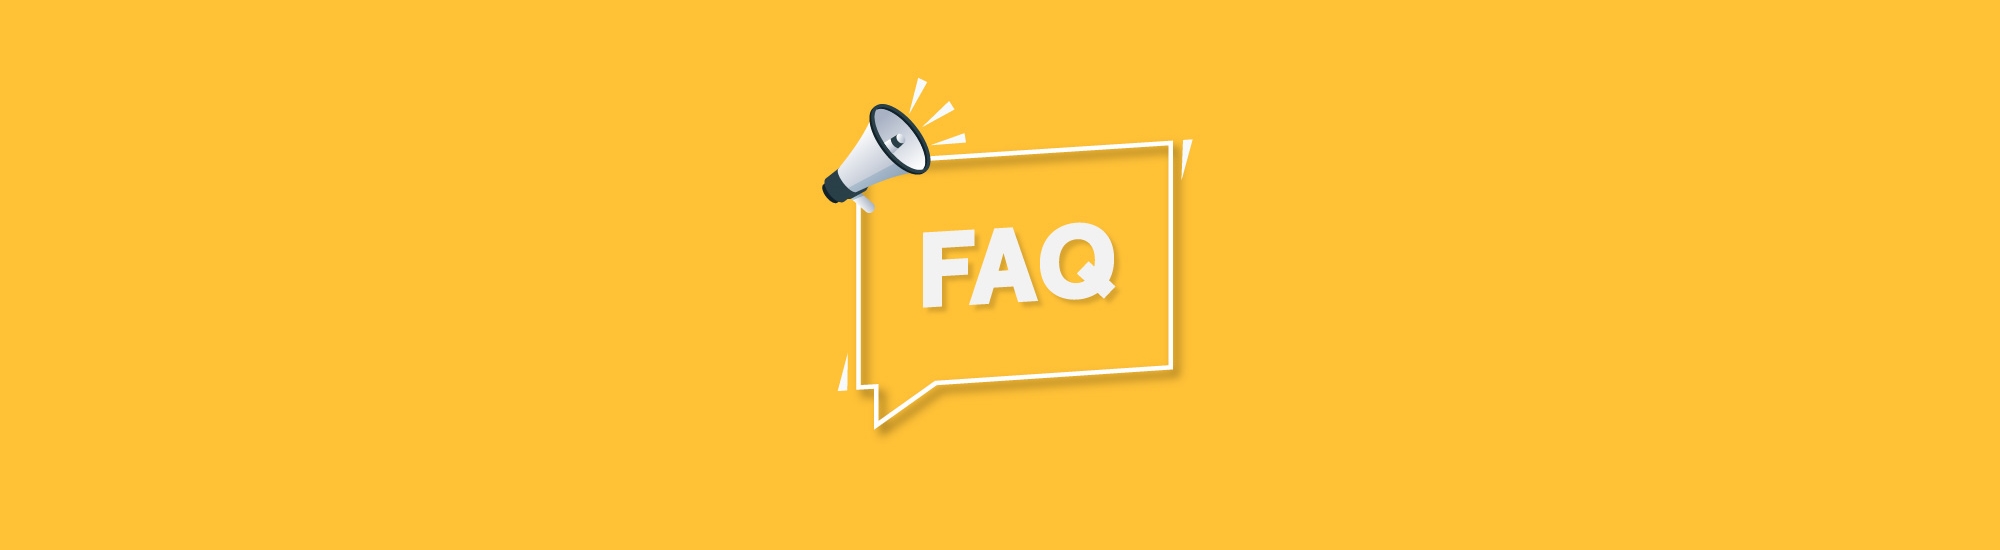 In order to help you use GetHeard@City, we've put together a handy set of FAQs.